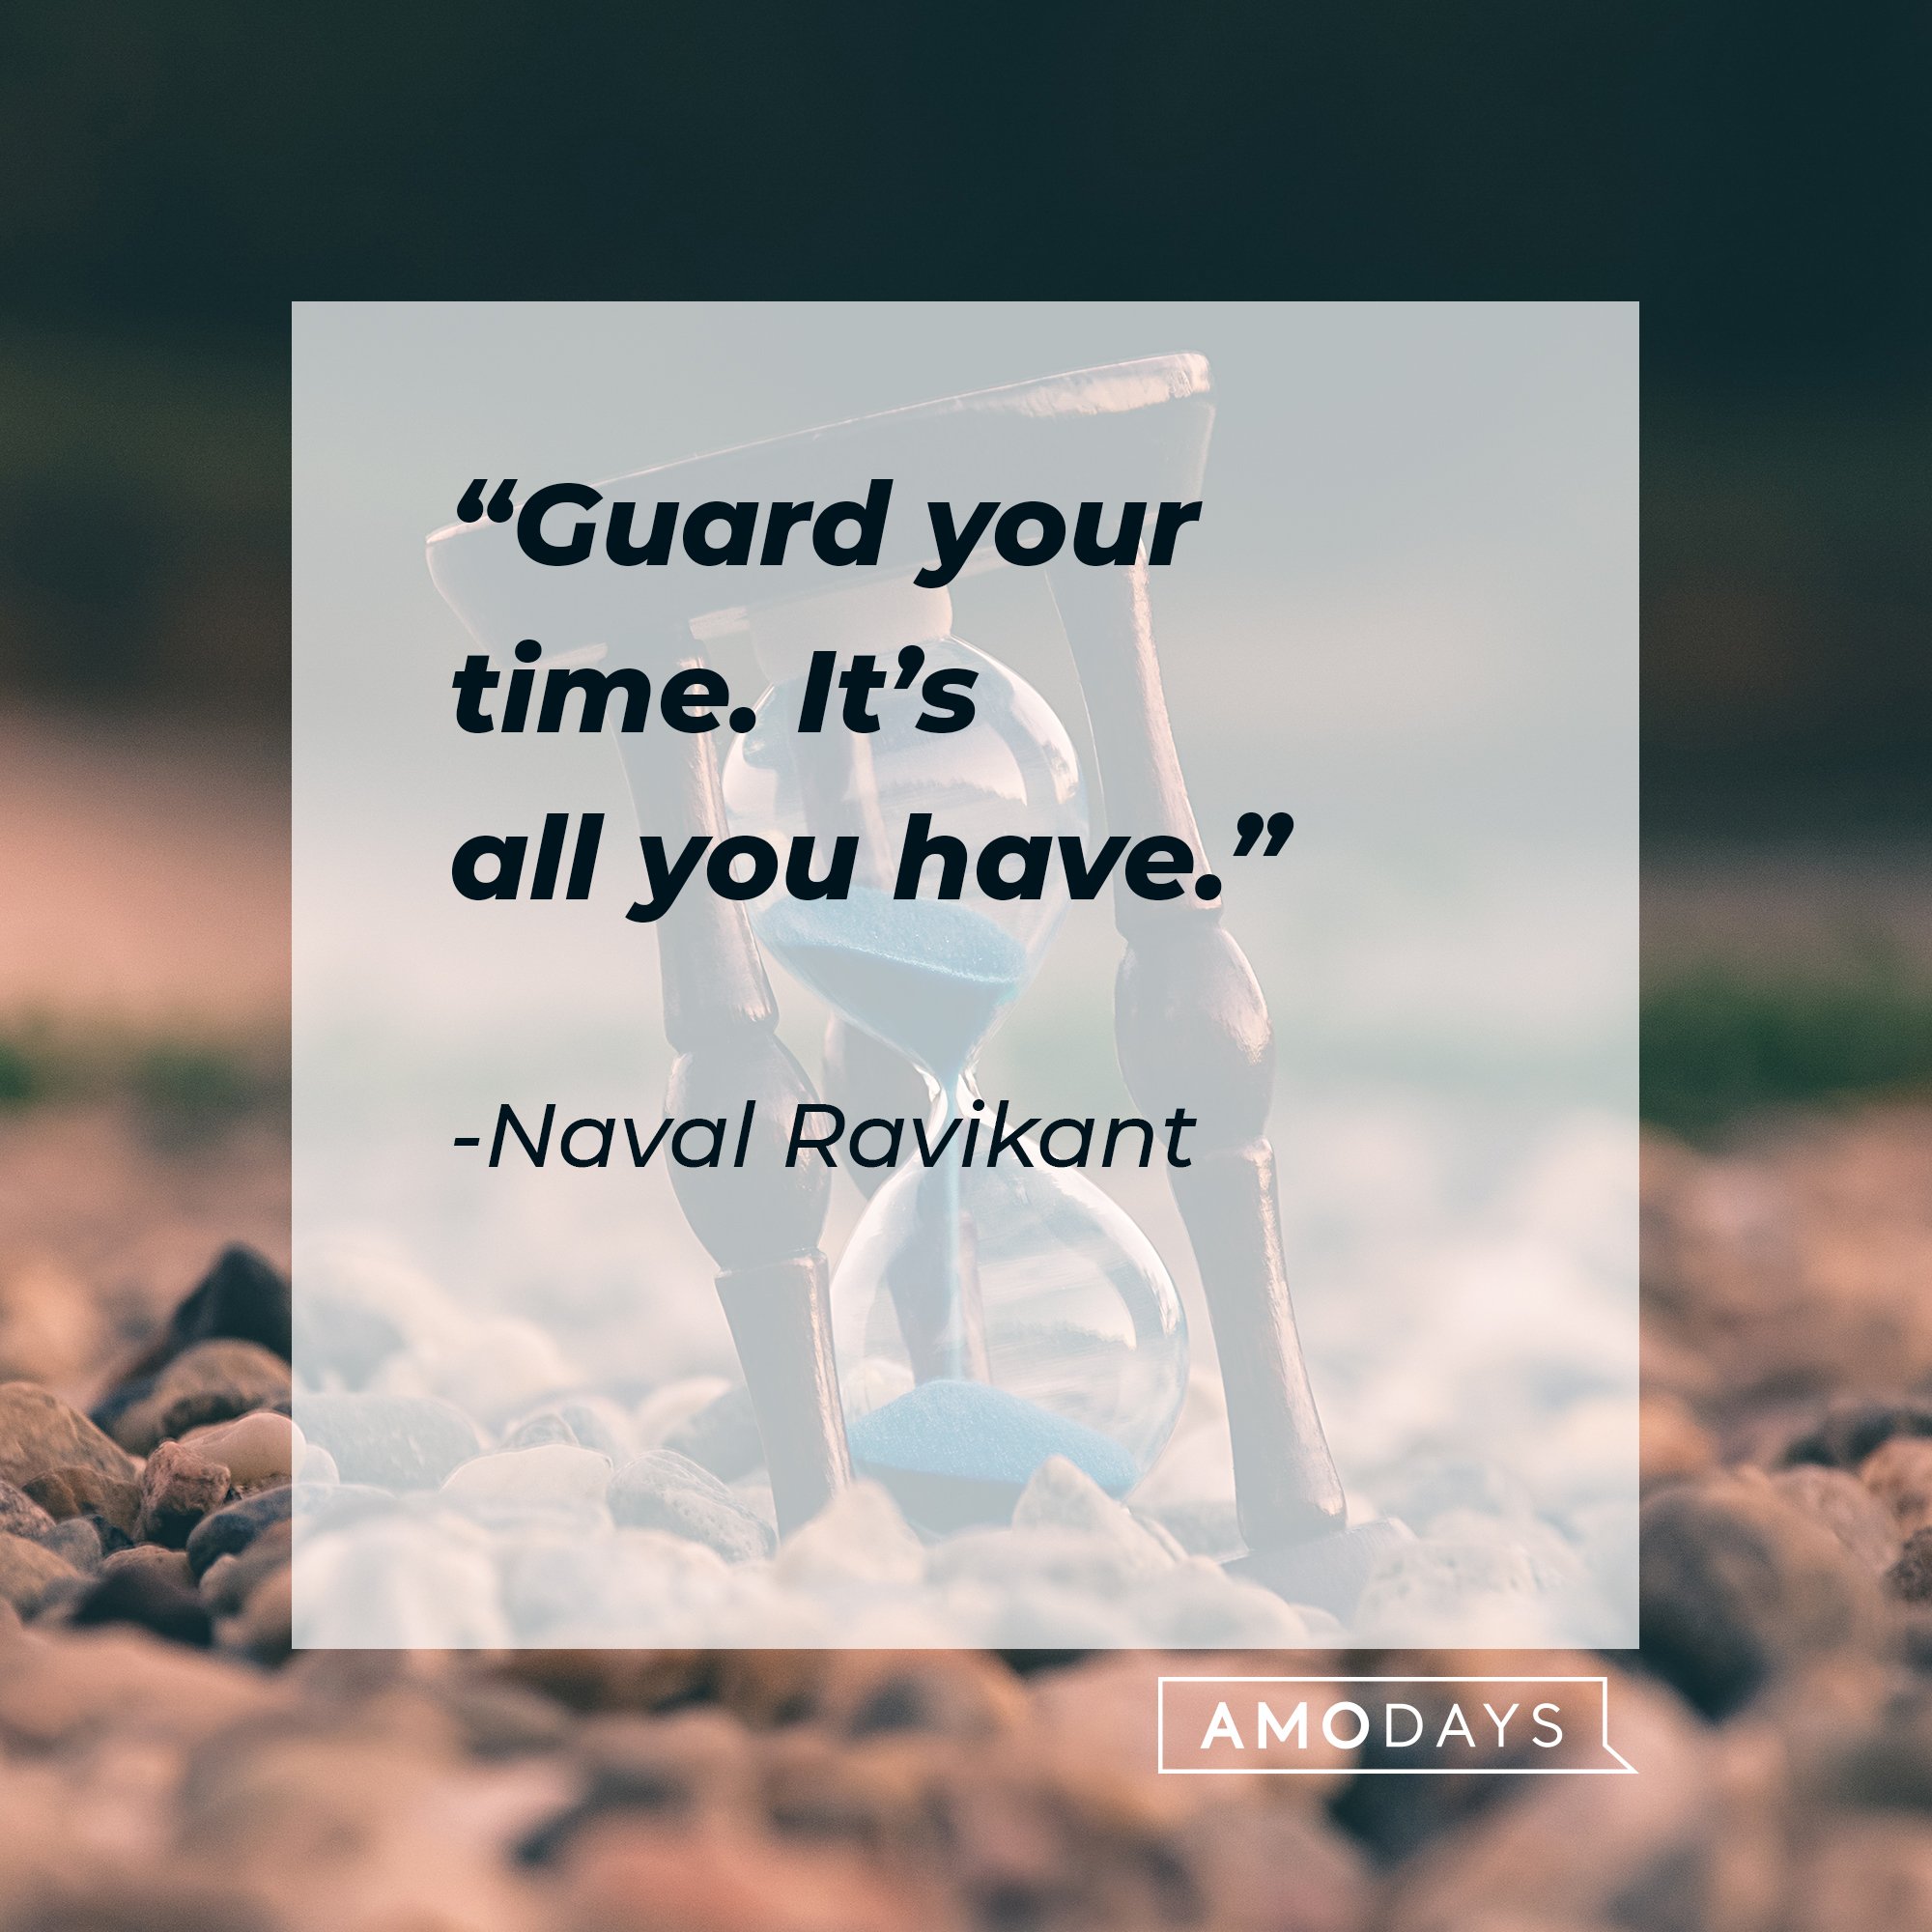 Naval Ravikant's quote: "Guard your time. It’s all you have." | Image: AmoDays